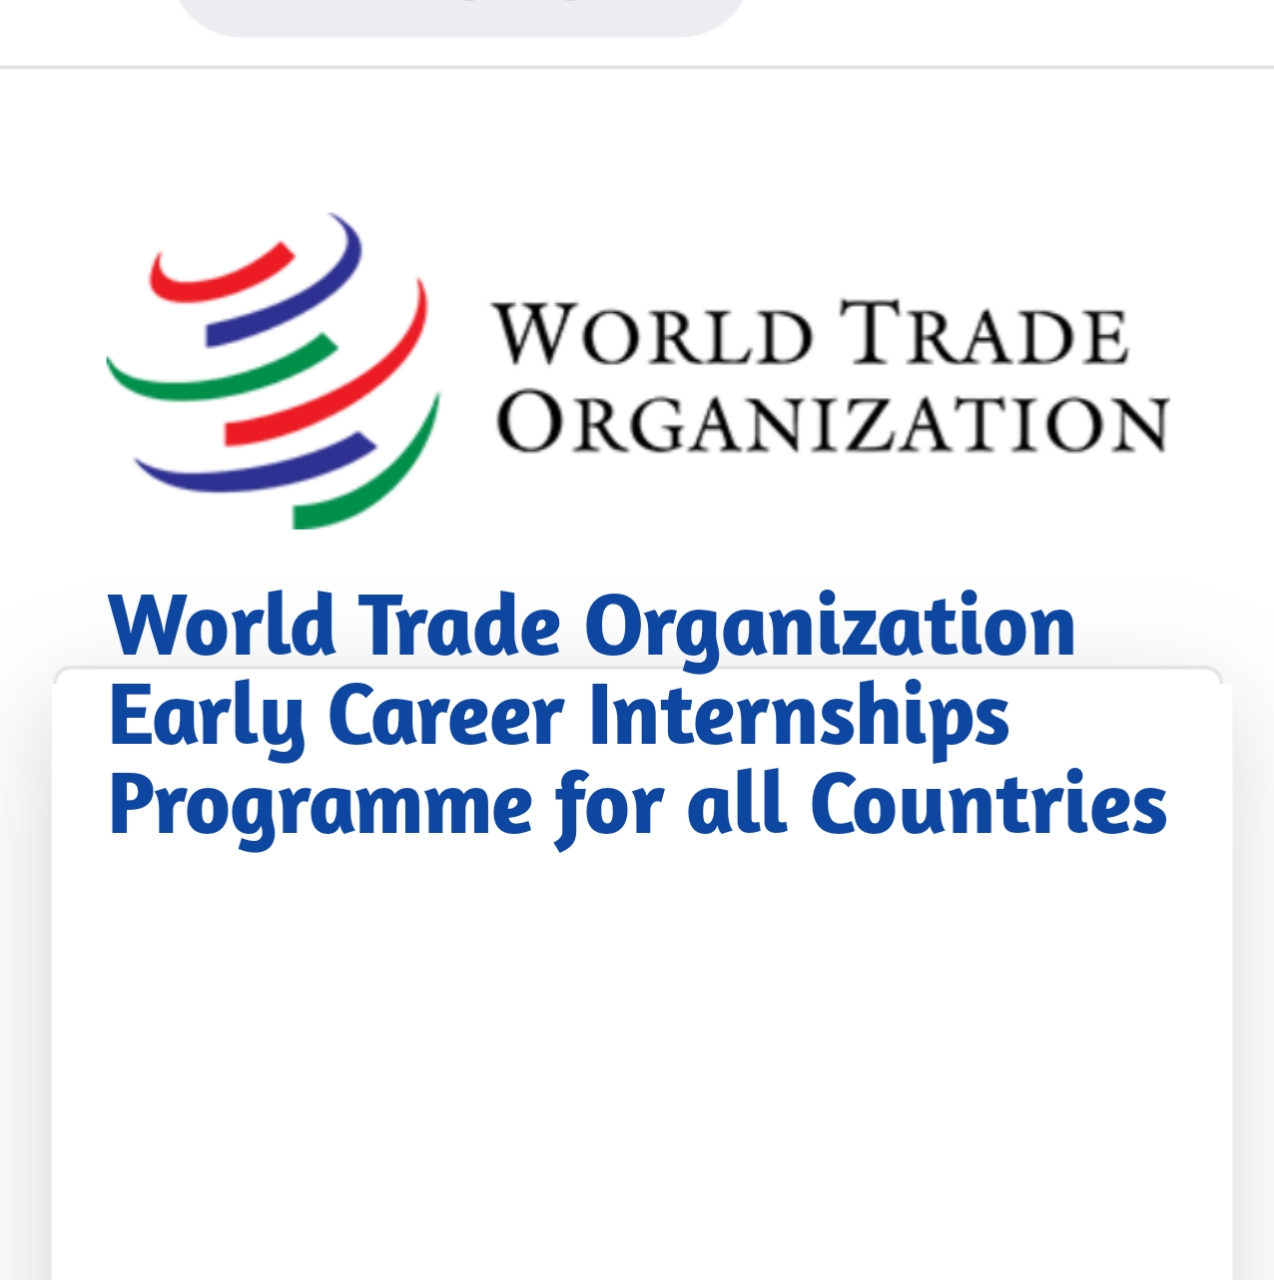 20221122 131123 - World Trade Organization Early Career Internships Programme for all Countries